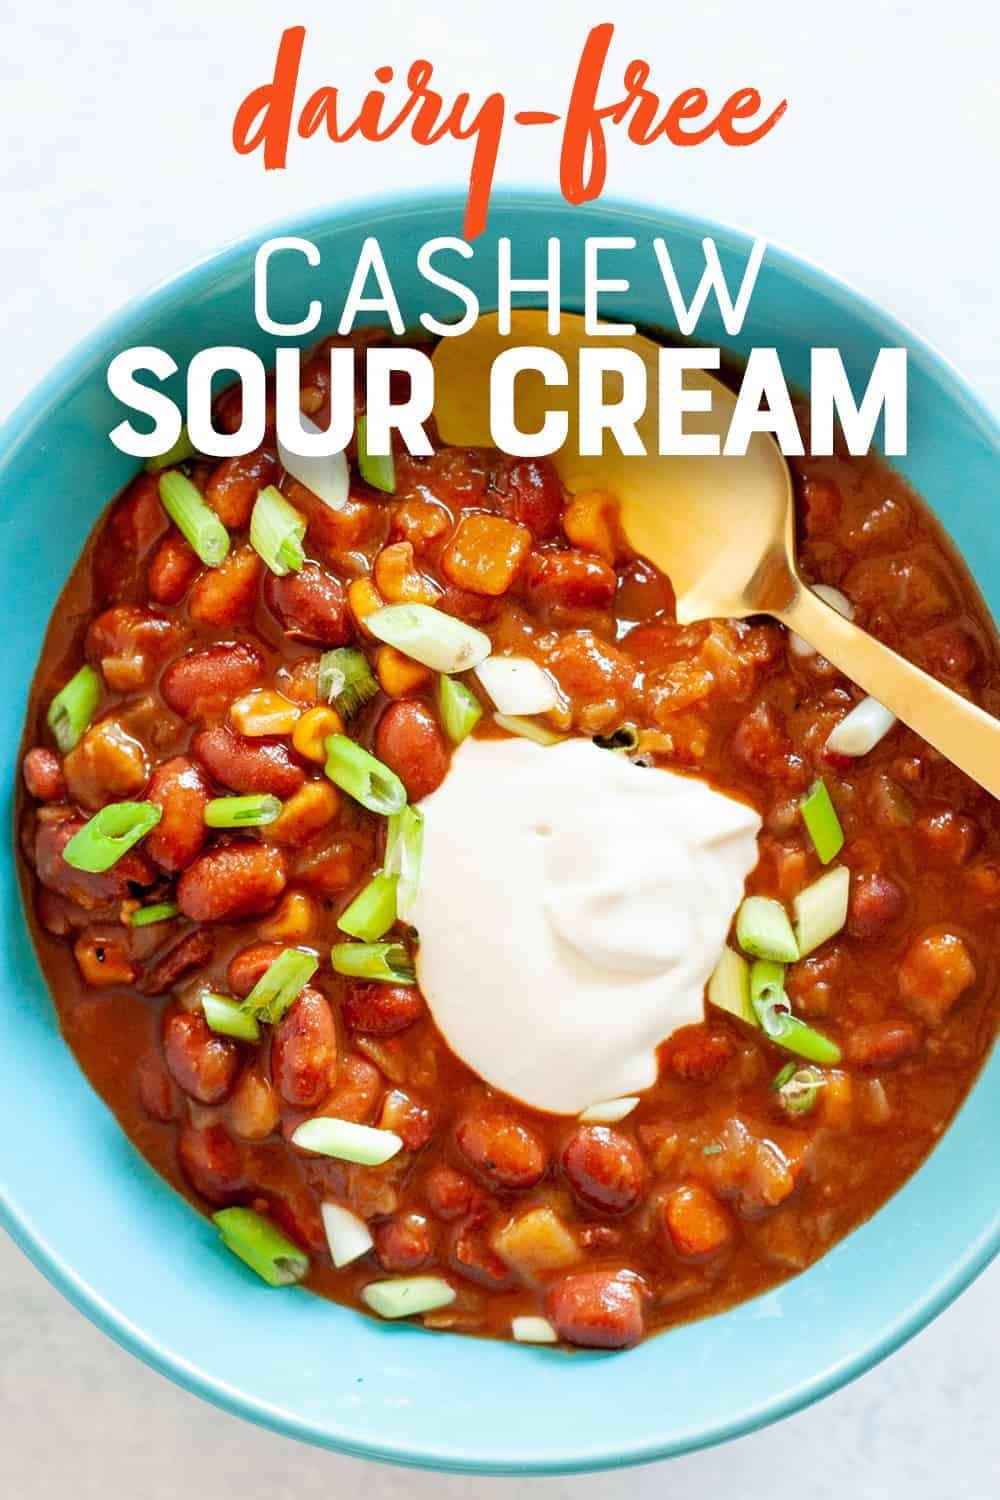 Cashew sour cream on top of chili in a blue bowl. A text overlay reads, "Dairy-Free Cashew Sour Cream."